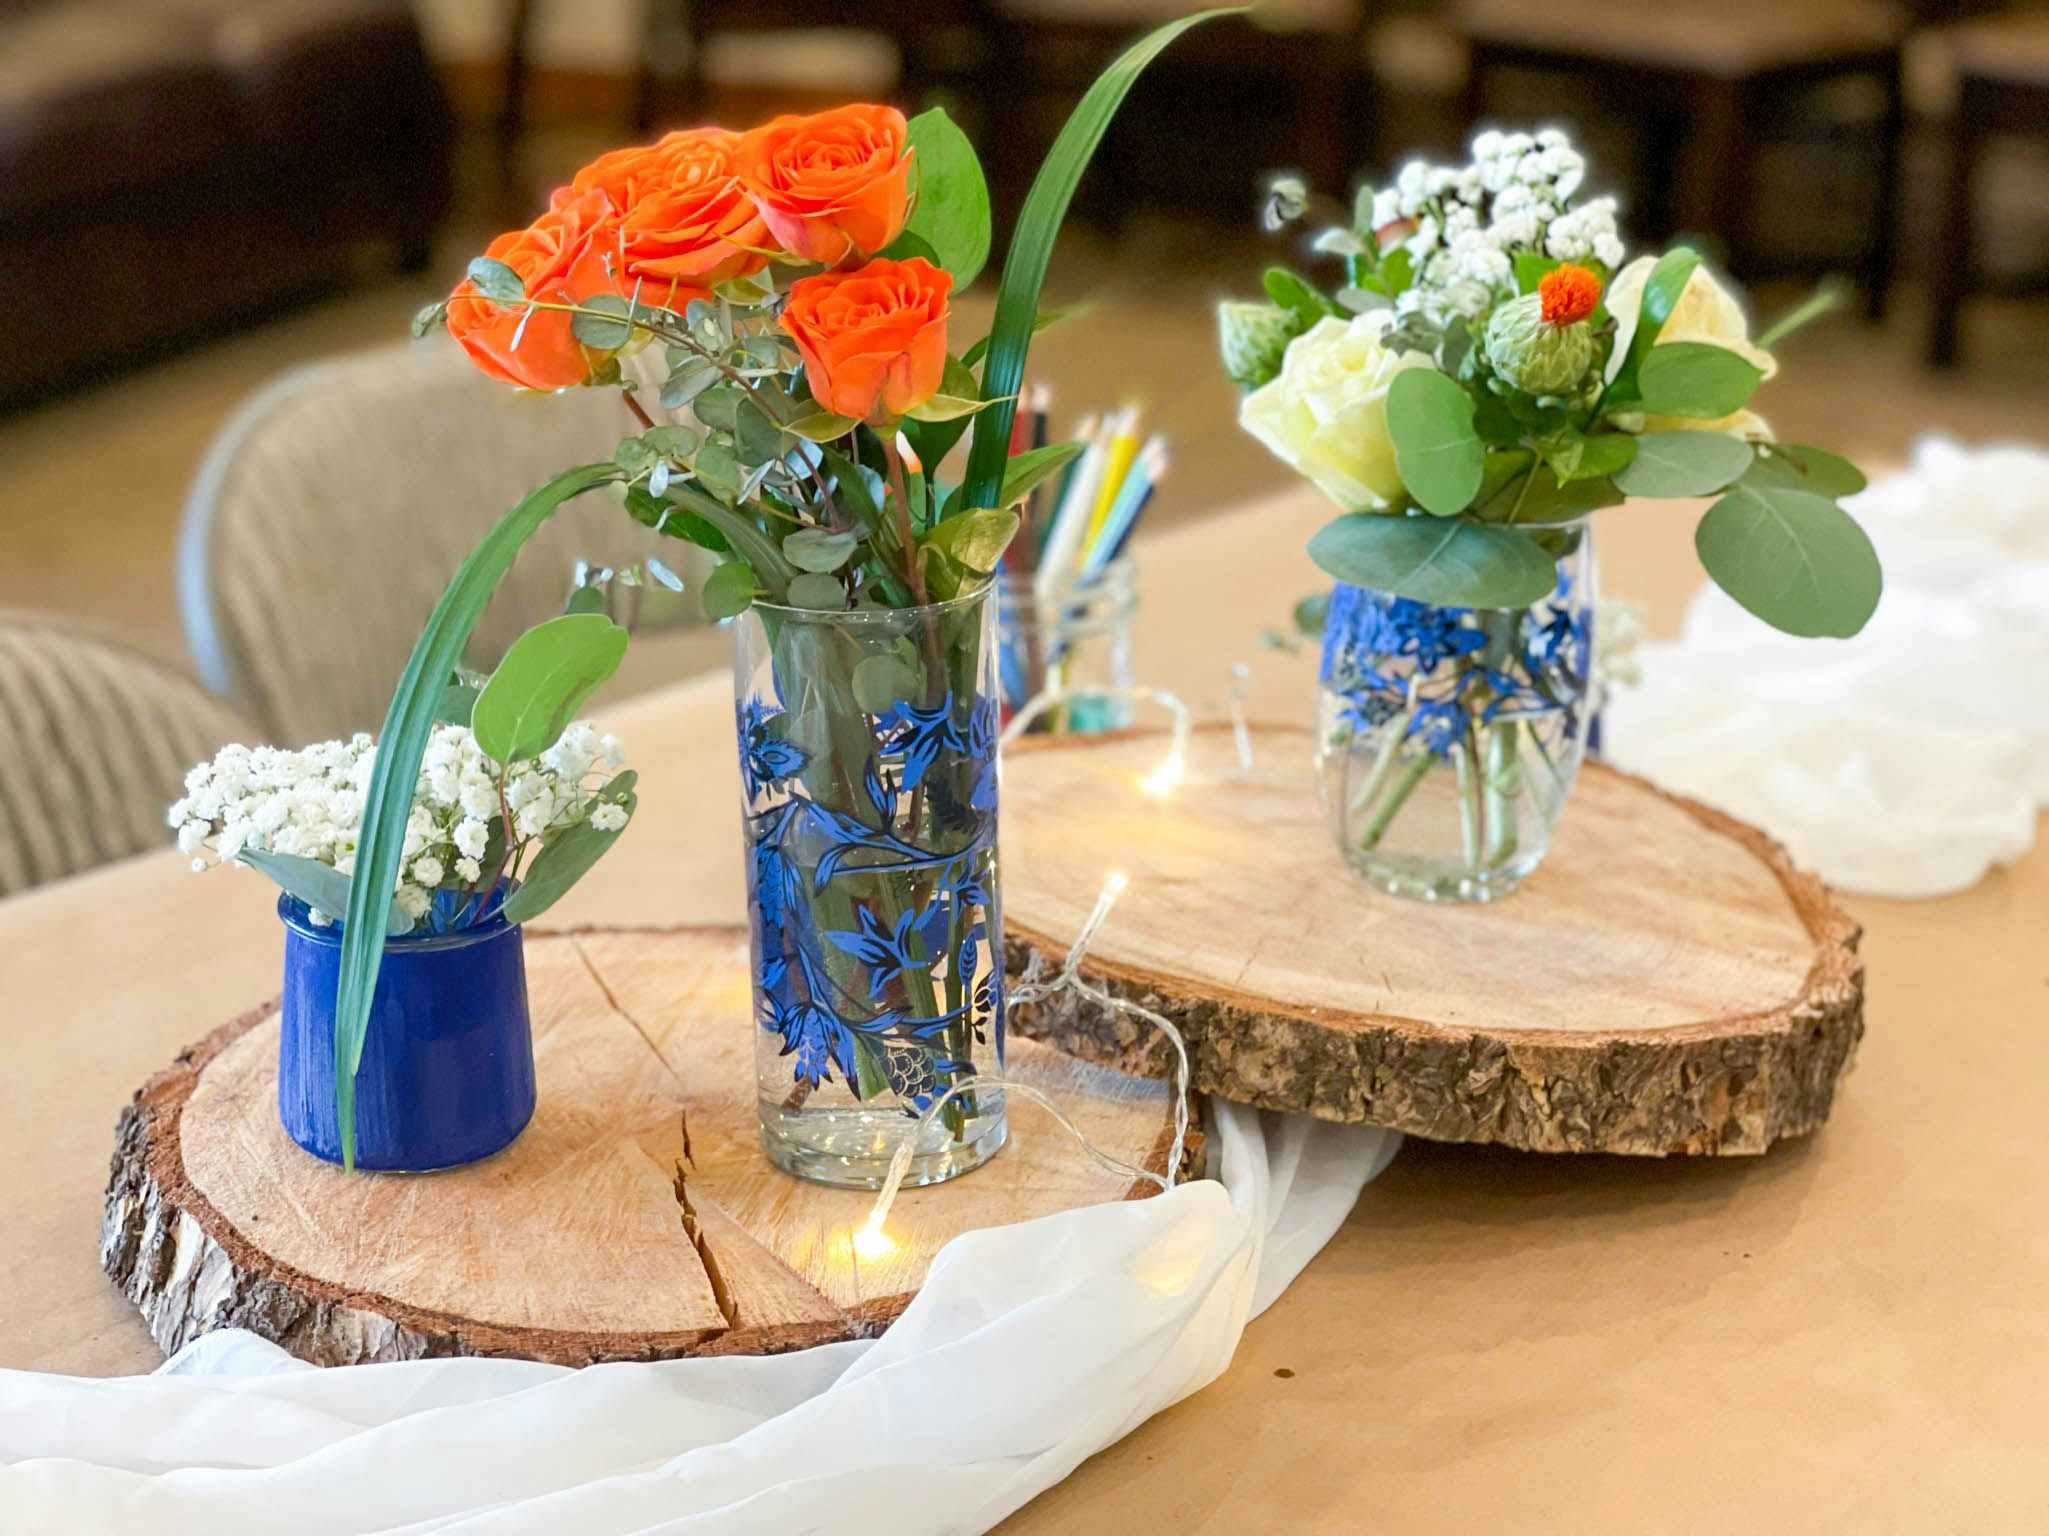 Flowers in vases on slices of wood.